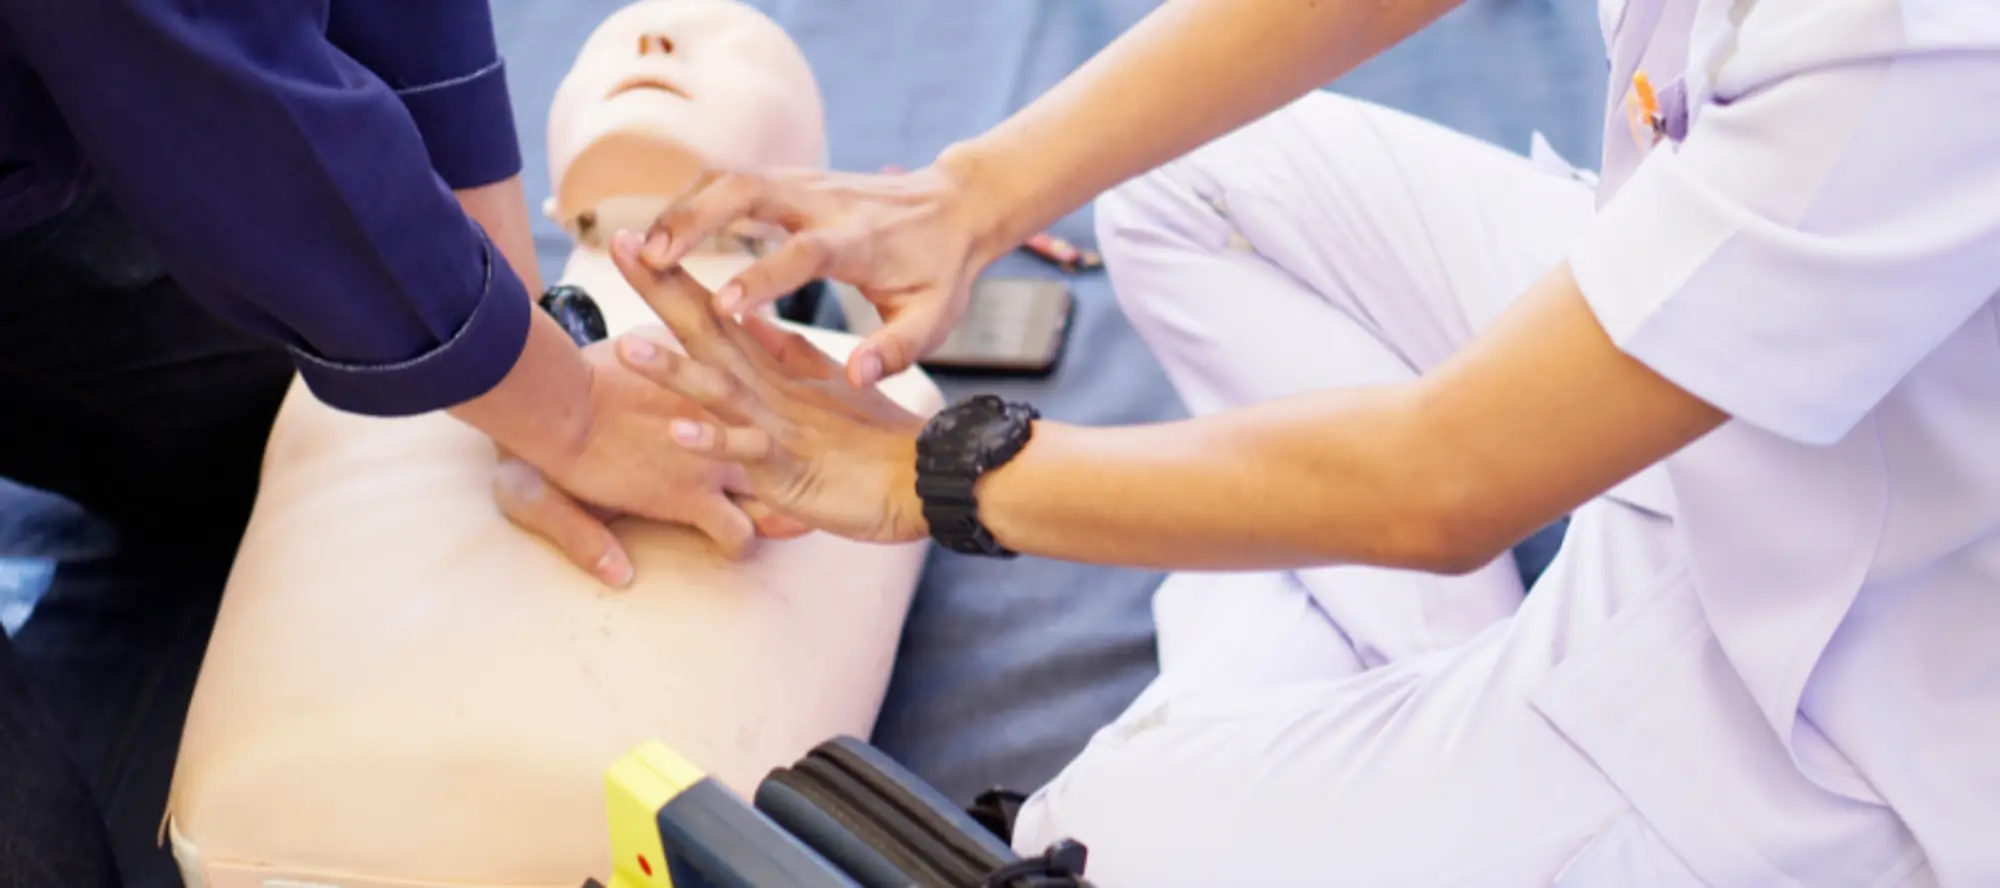 First aid training for care home staff